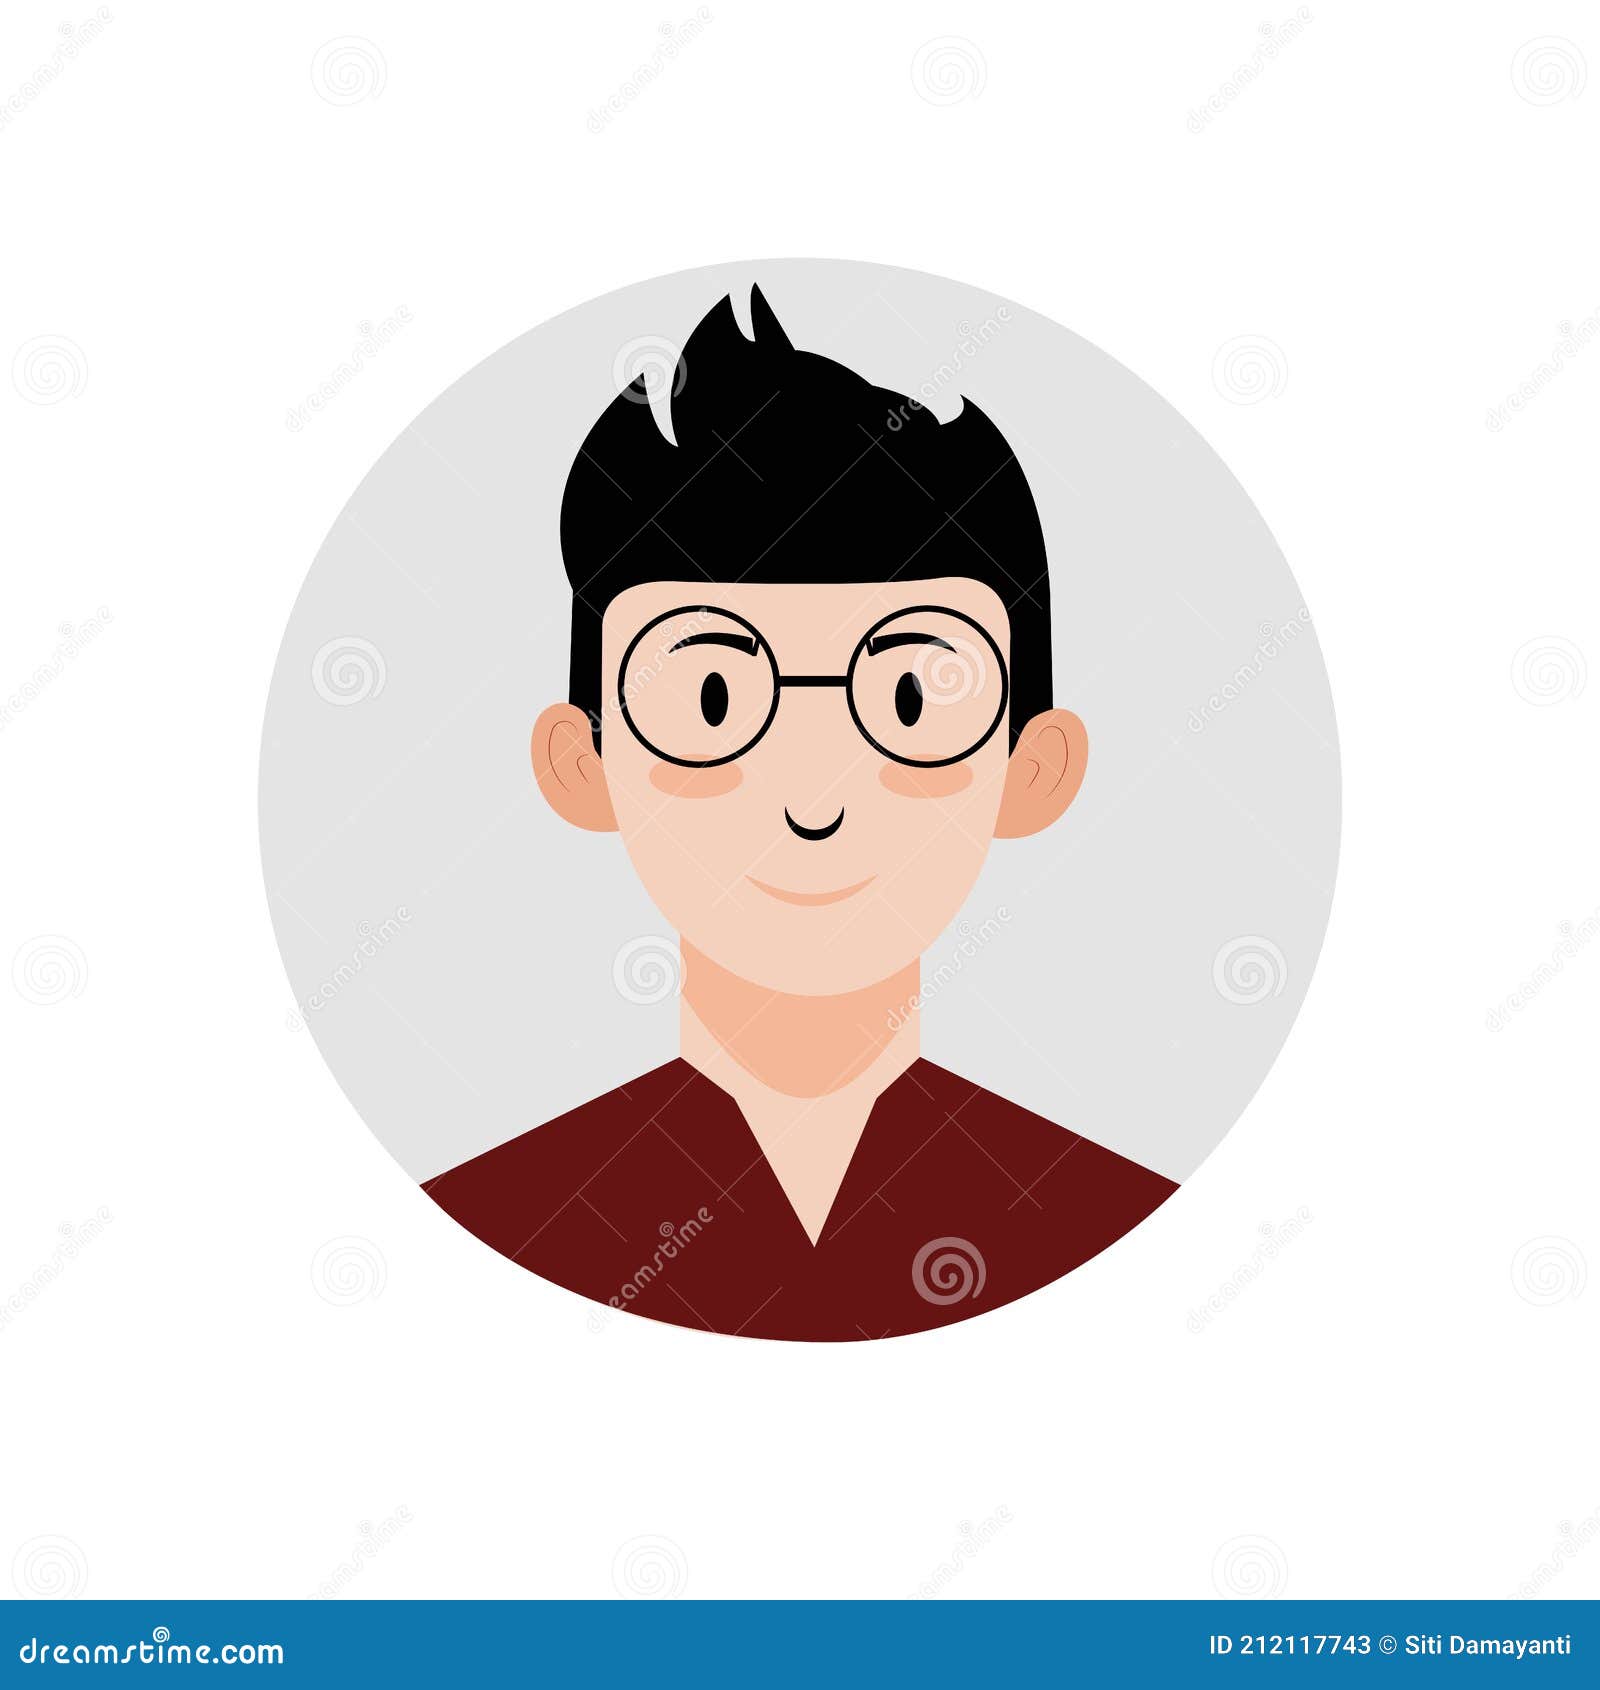 Illustration Vector of Male Avatar Icon Wearing Nurse Shirt and ...